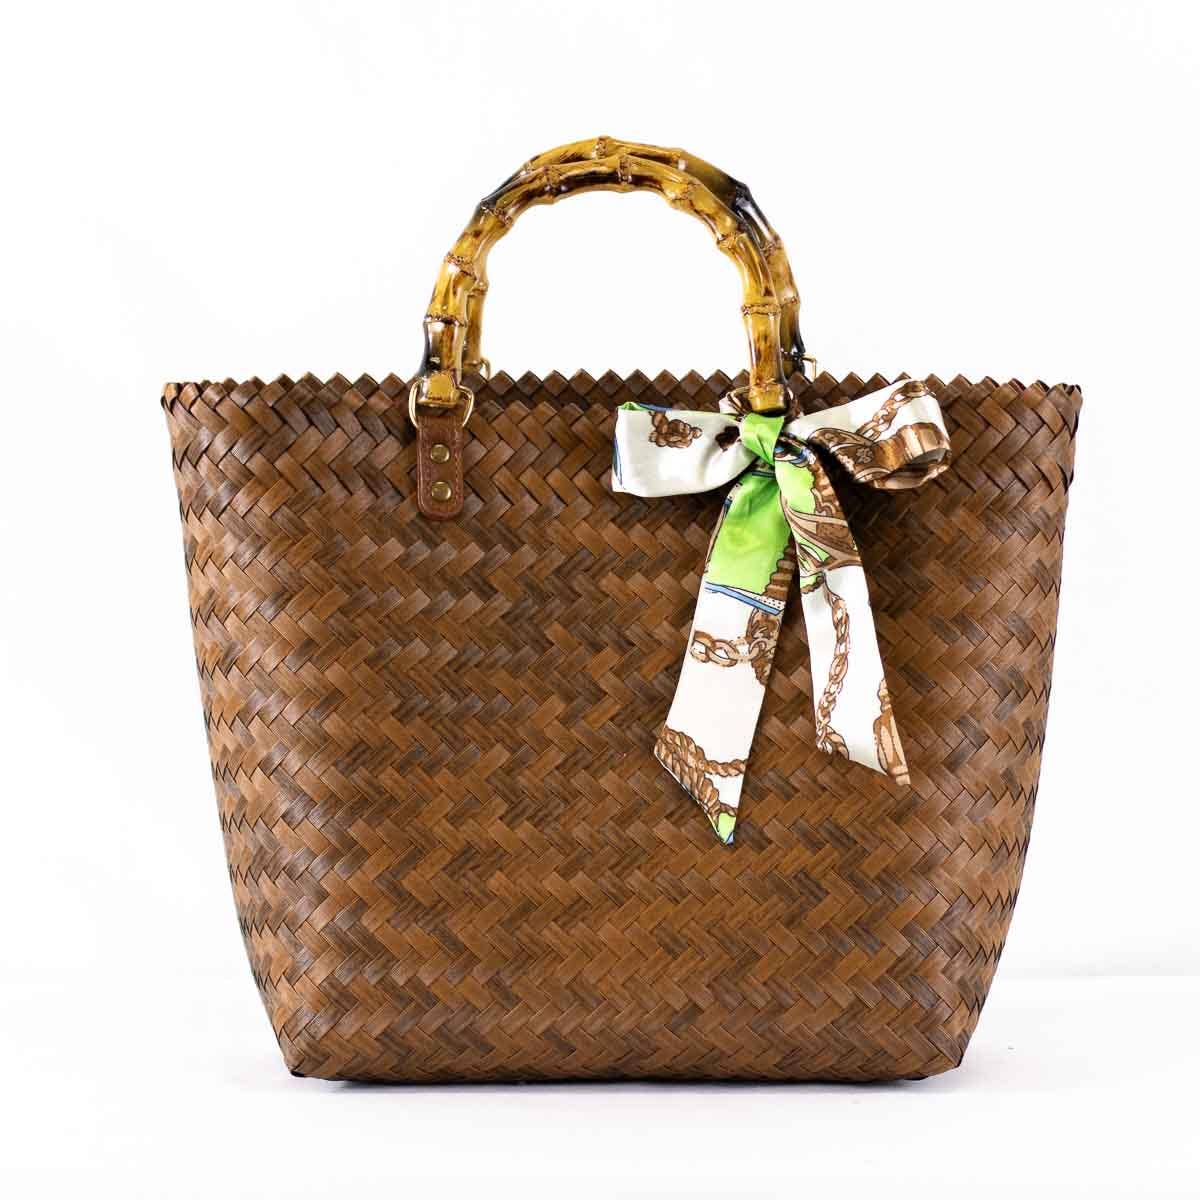 Gina Tote in Brown